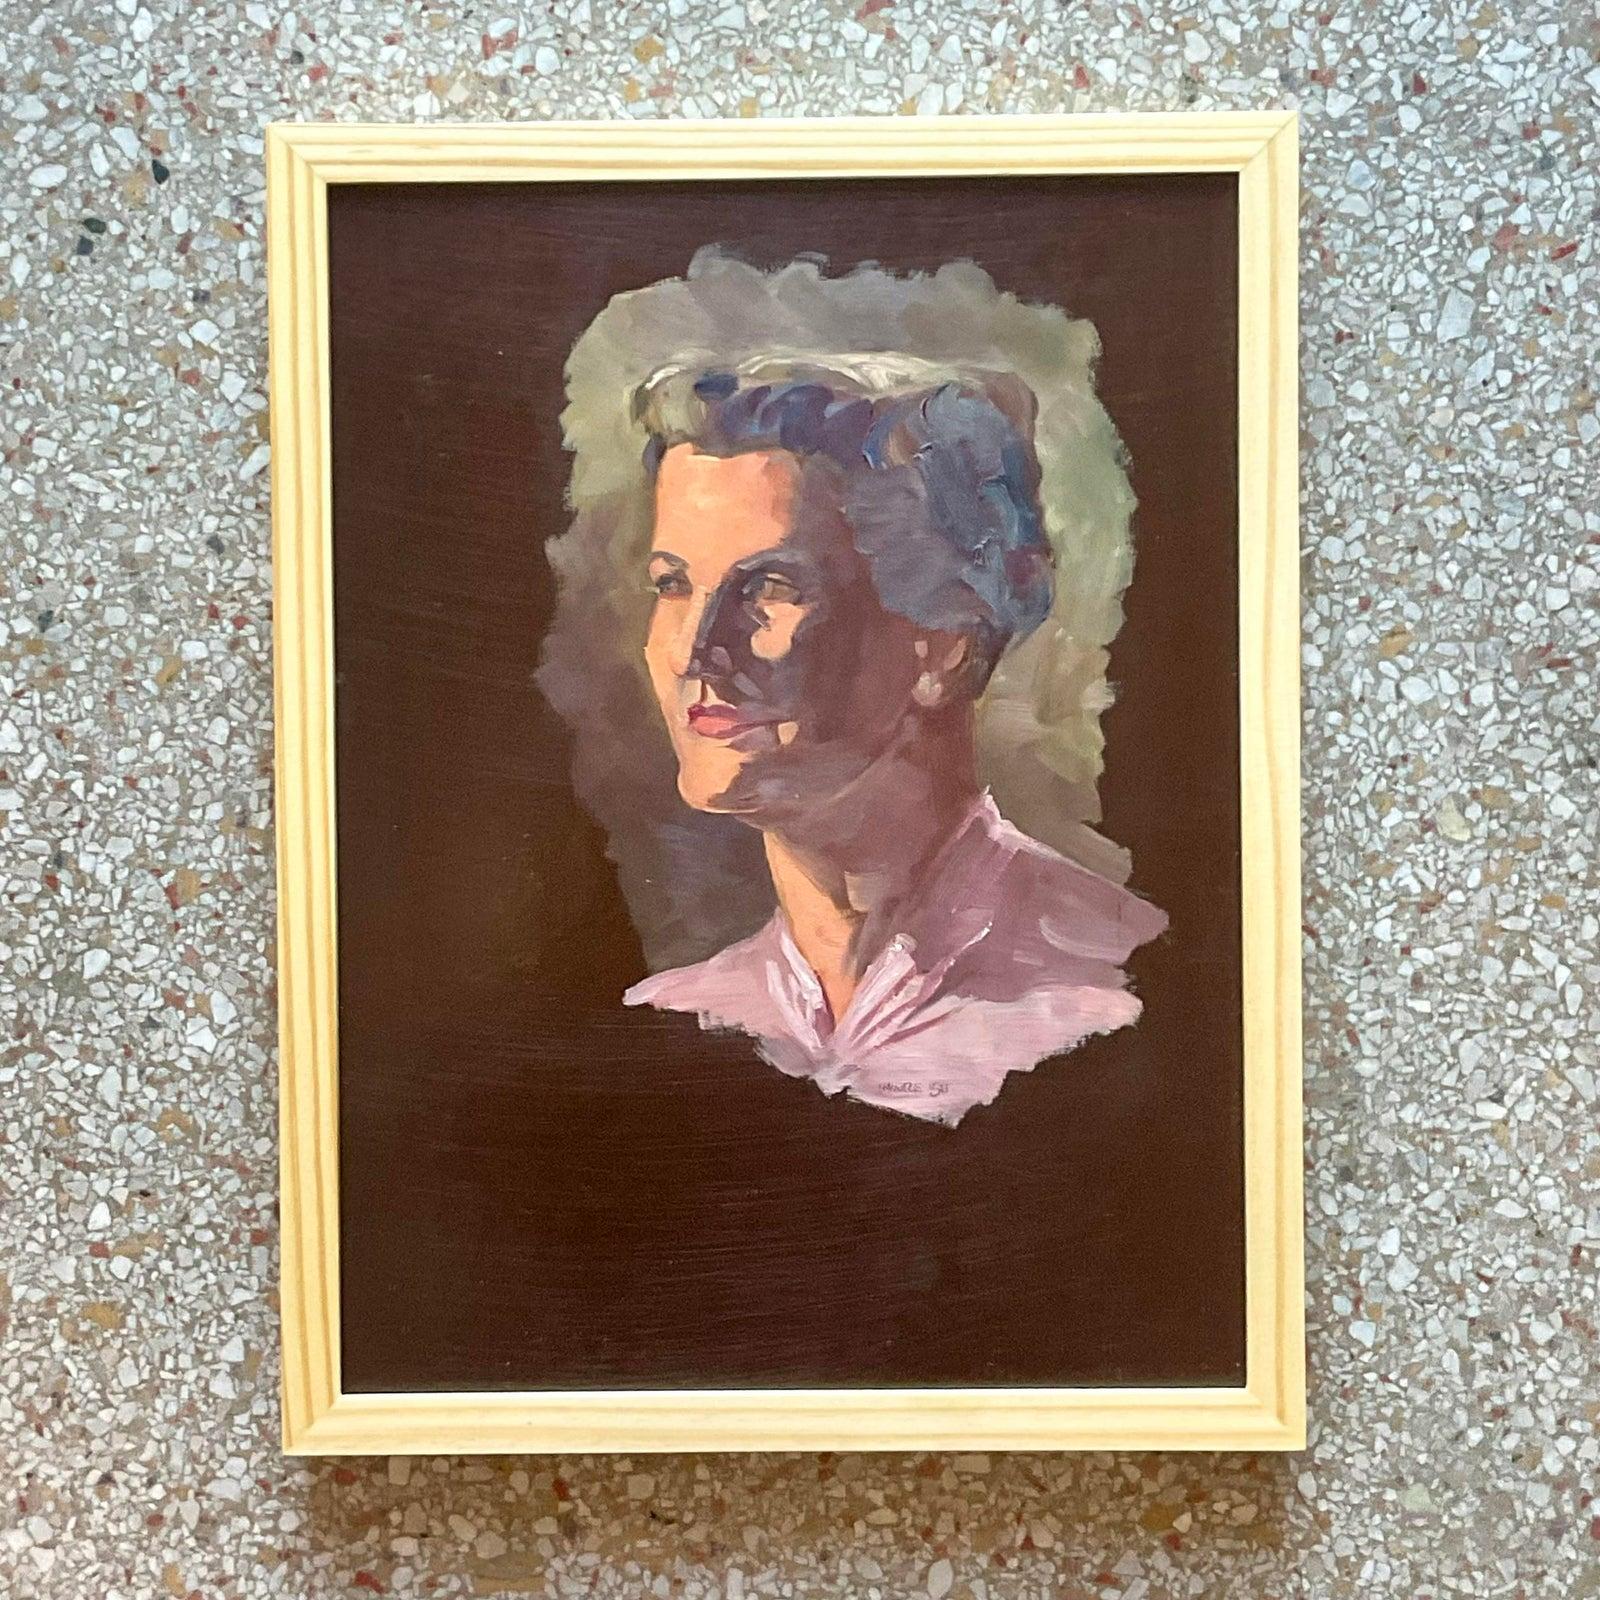 A fabulous vintage Boho original oil on board. A chic portrait of a beautiful woman. Signed by the artist. Acquired from a Palm Beach estate. 